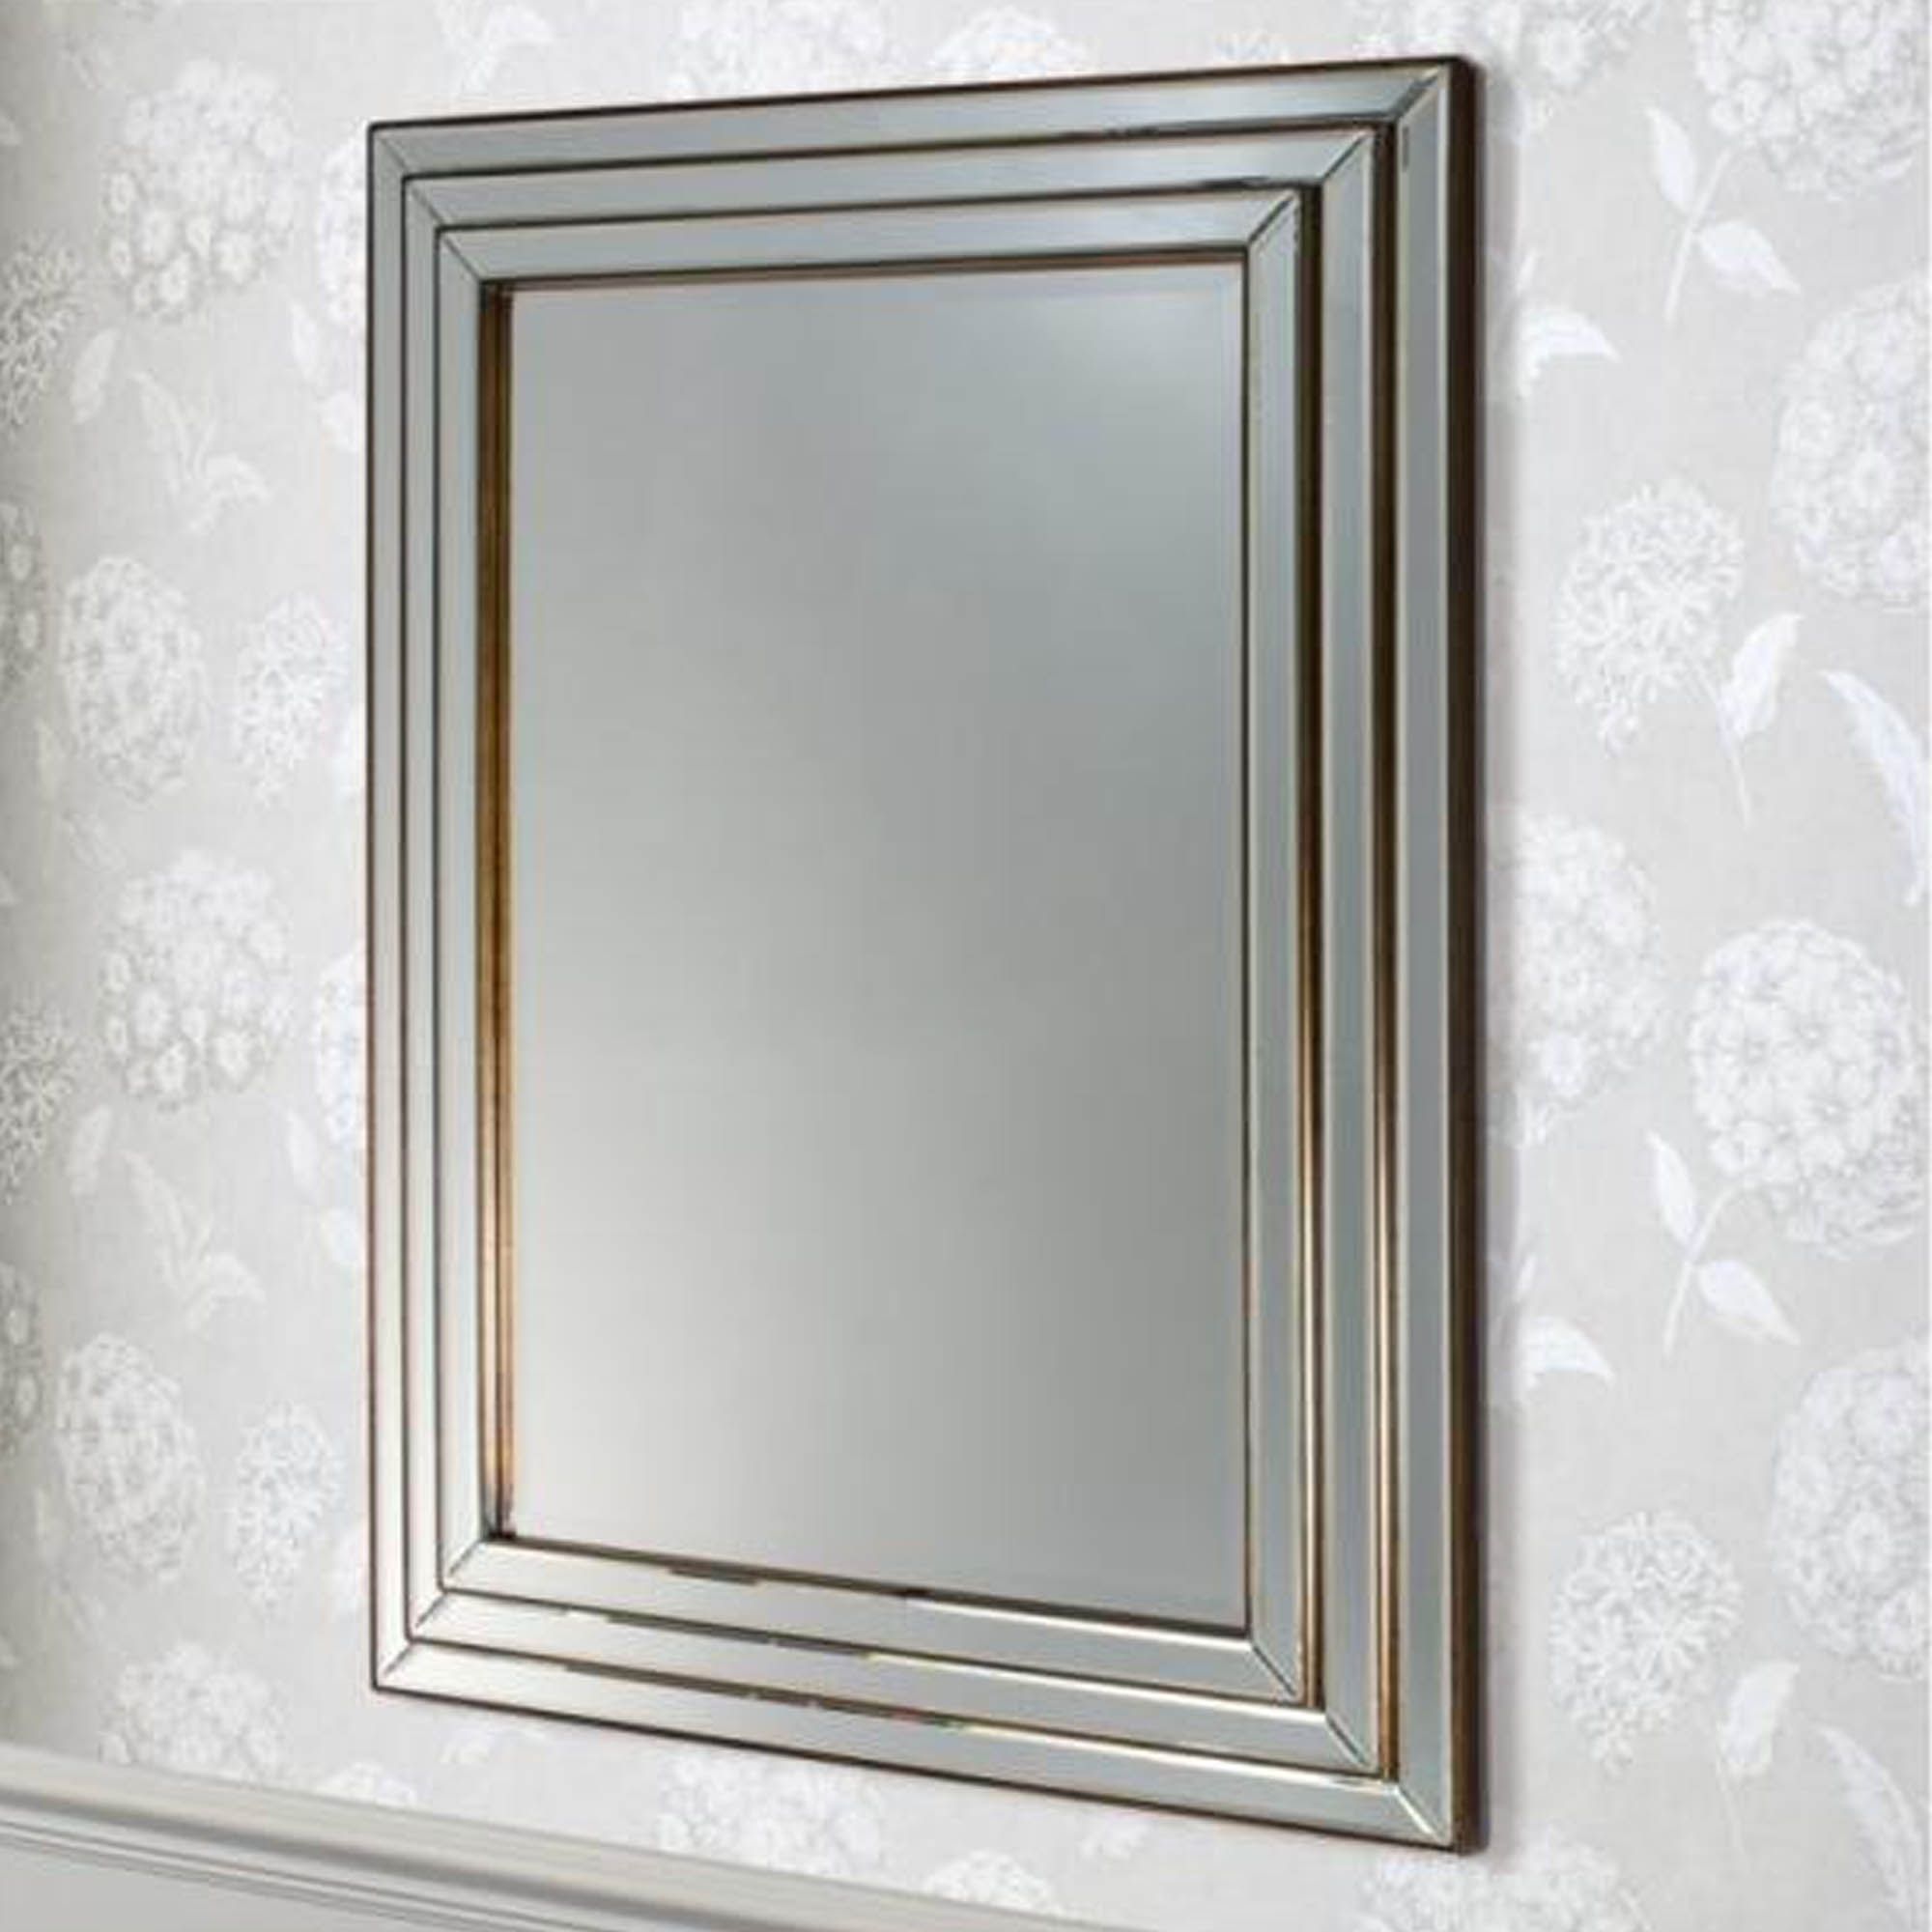 Chamberry Bronze Wall Mirror | Wall Mirror | Homesdirect365 With Regard To Bronze Quatrefoil Wall Mirrors (View 10 of 15)